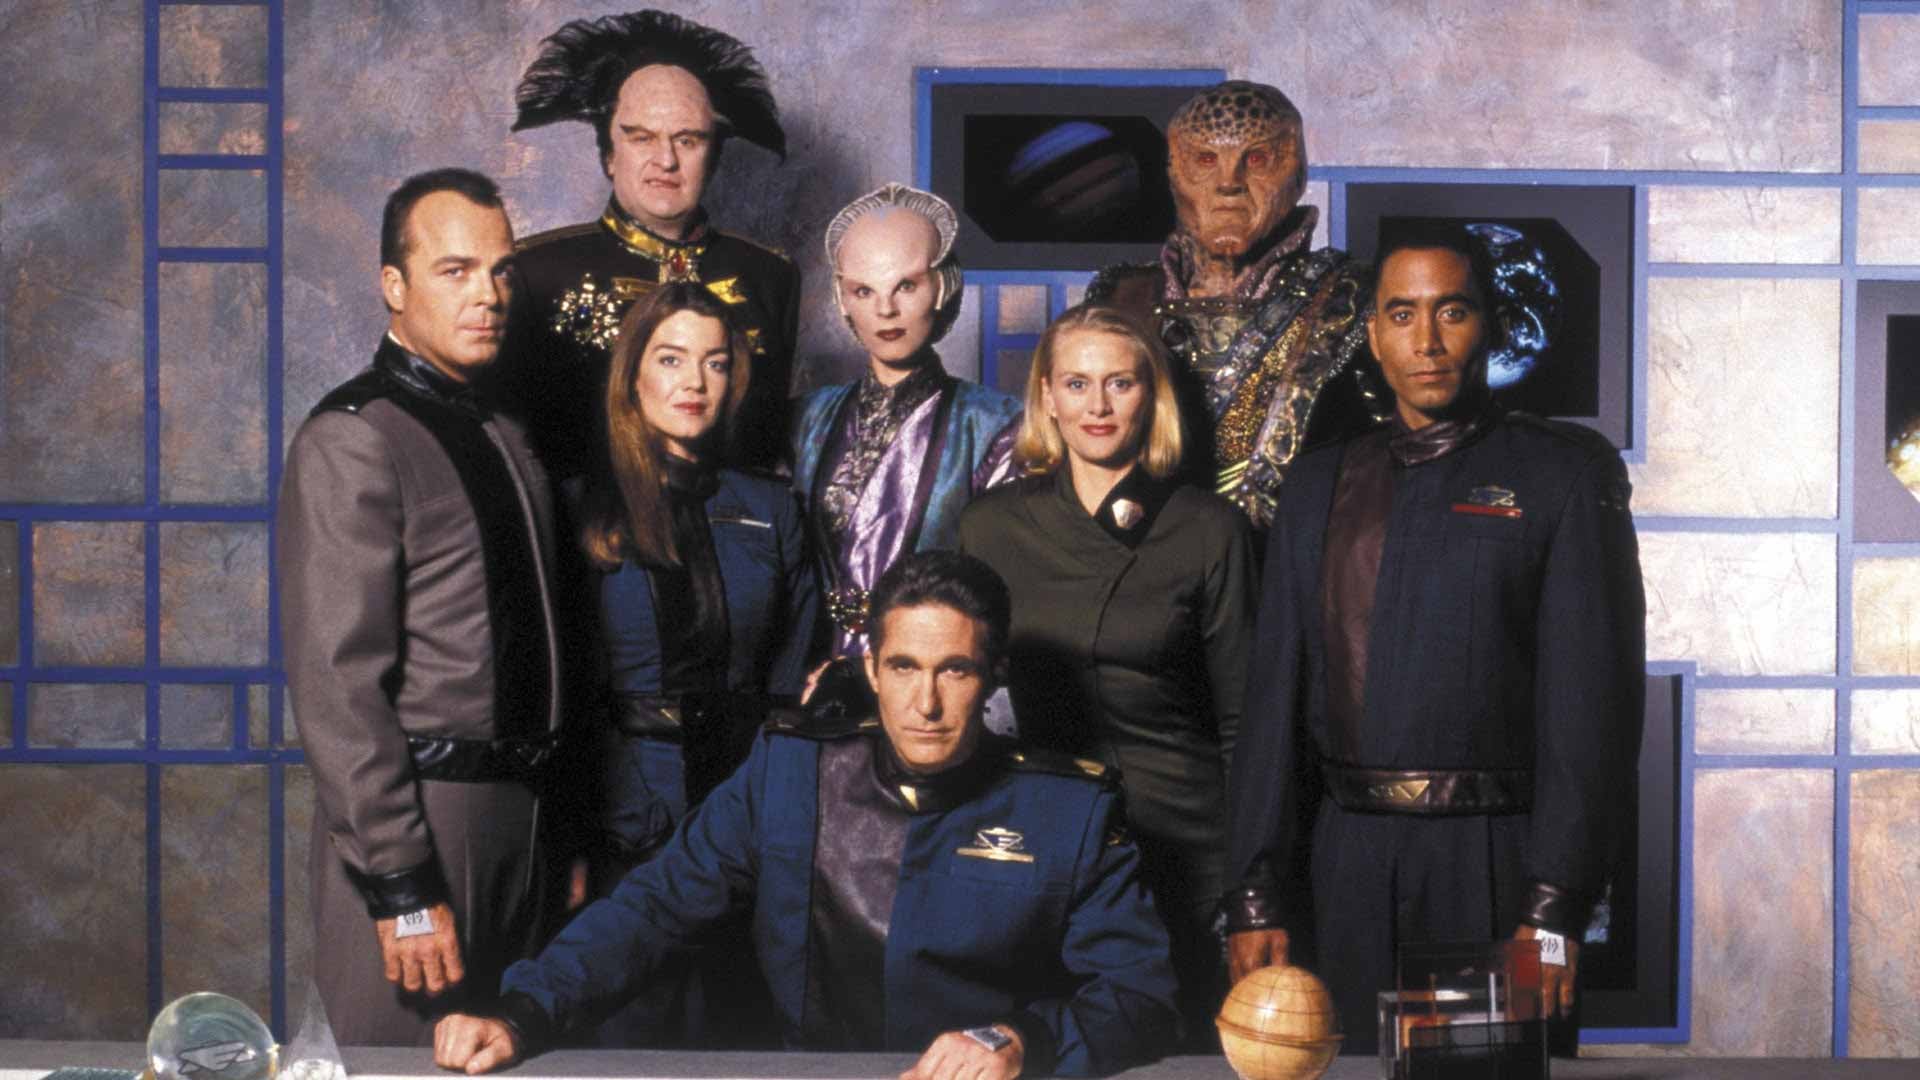 Babylon 5: The Movie Collection